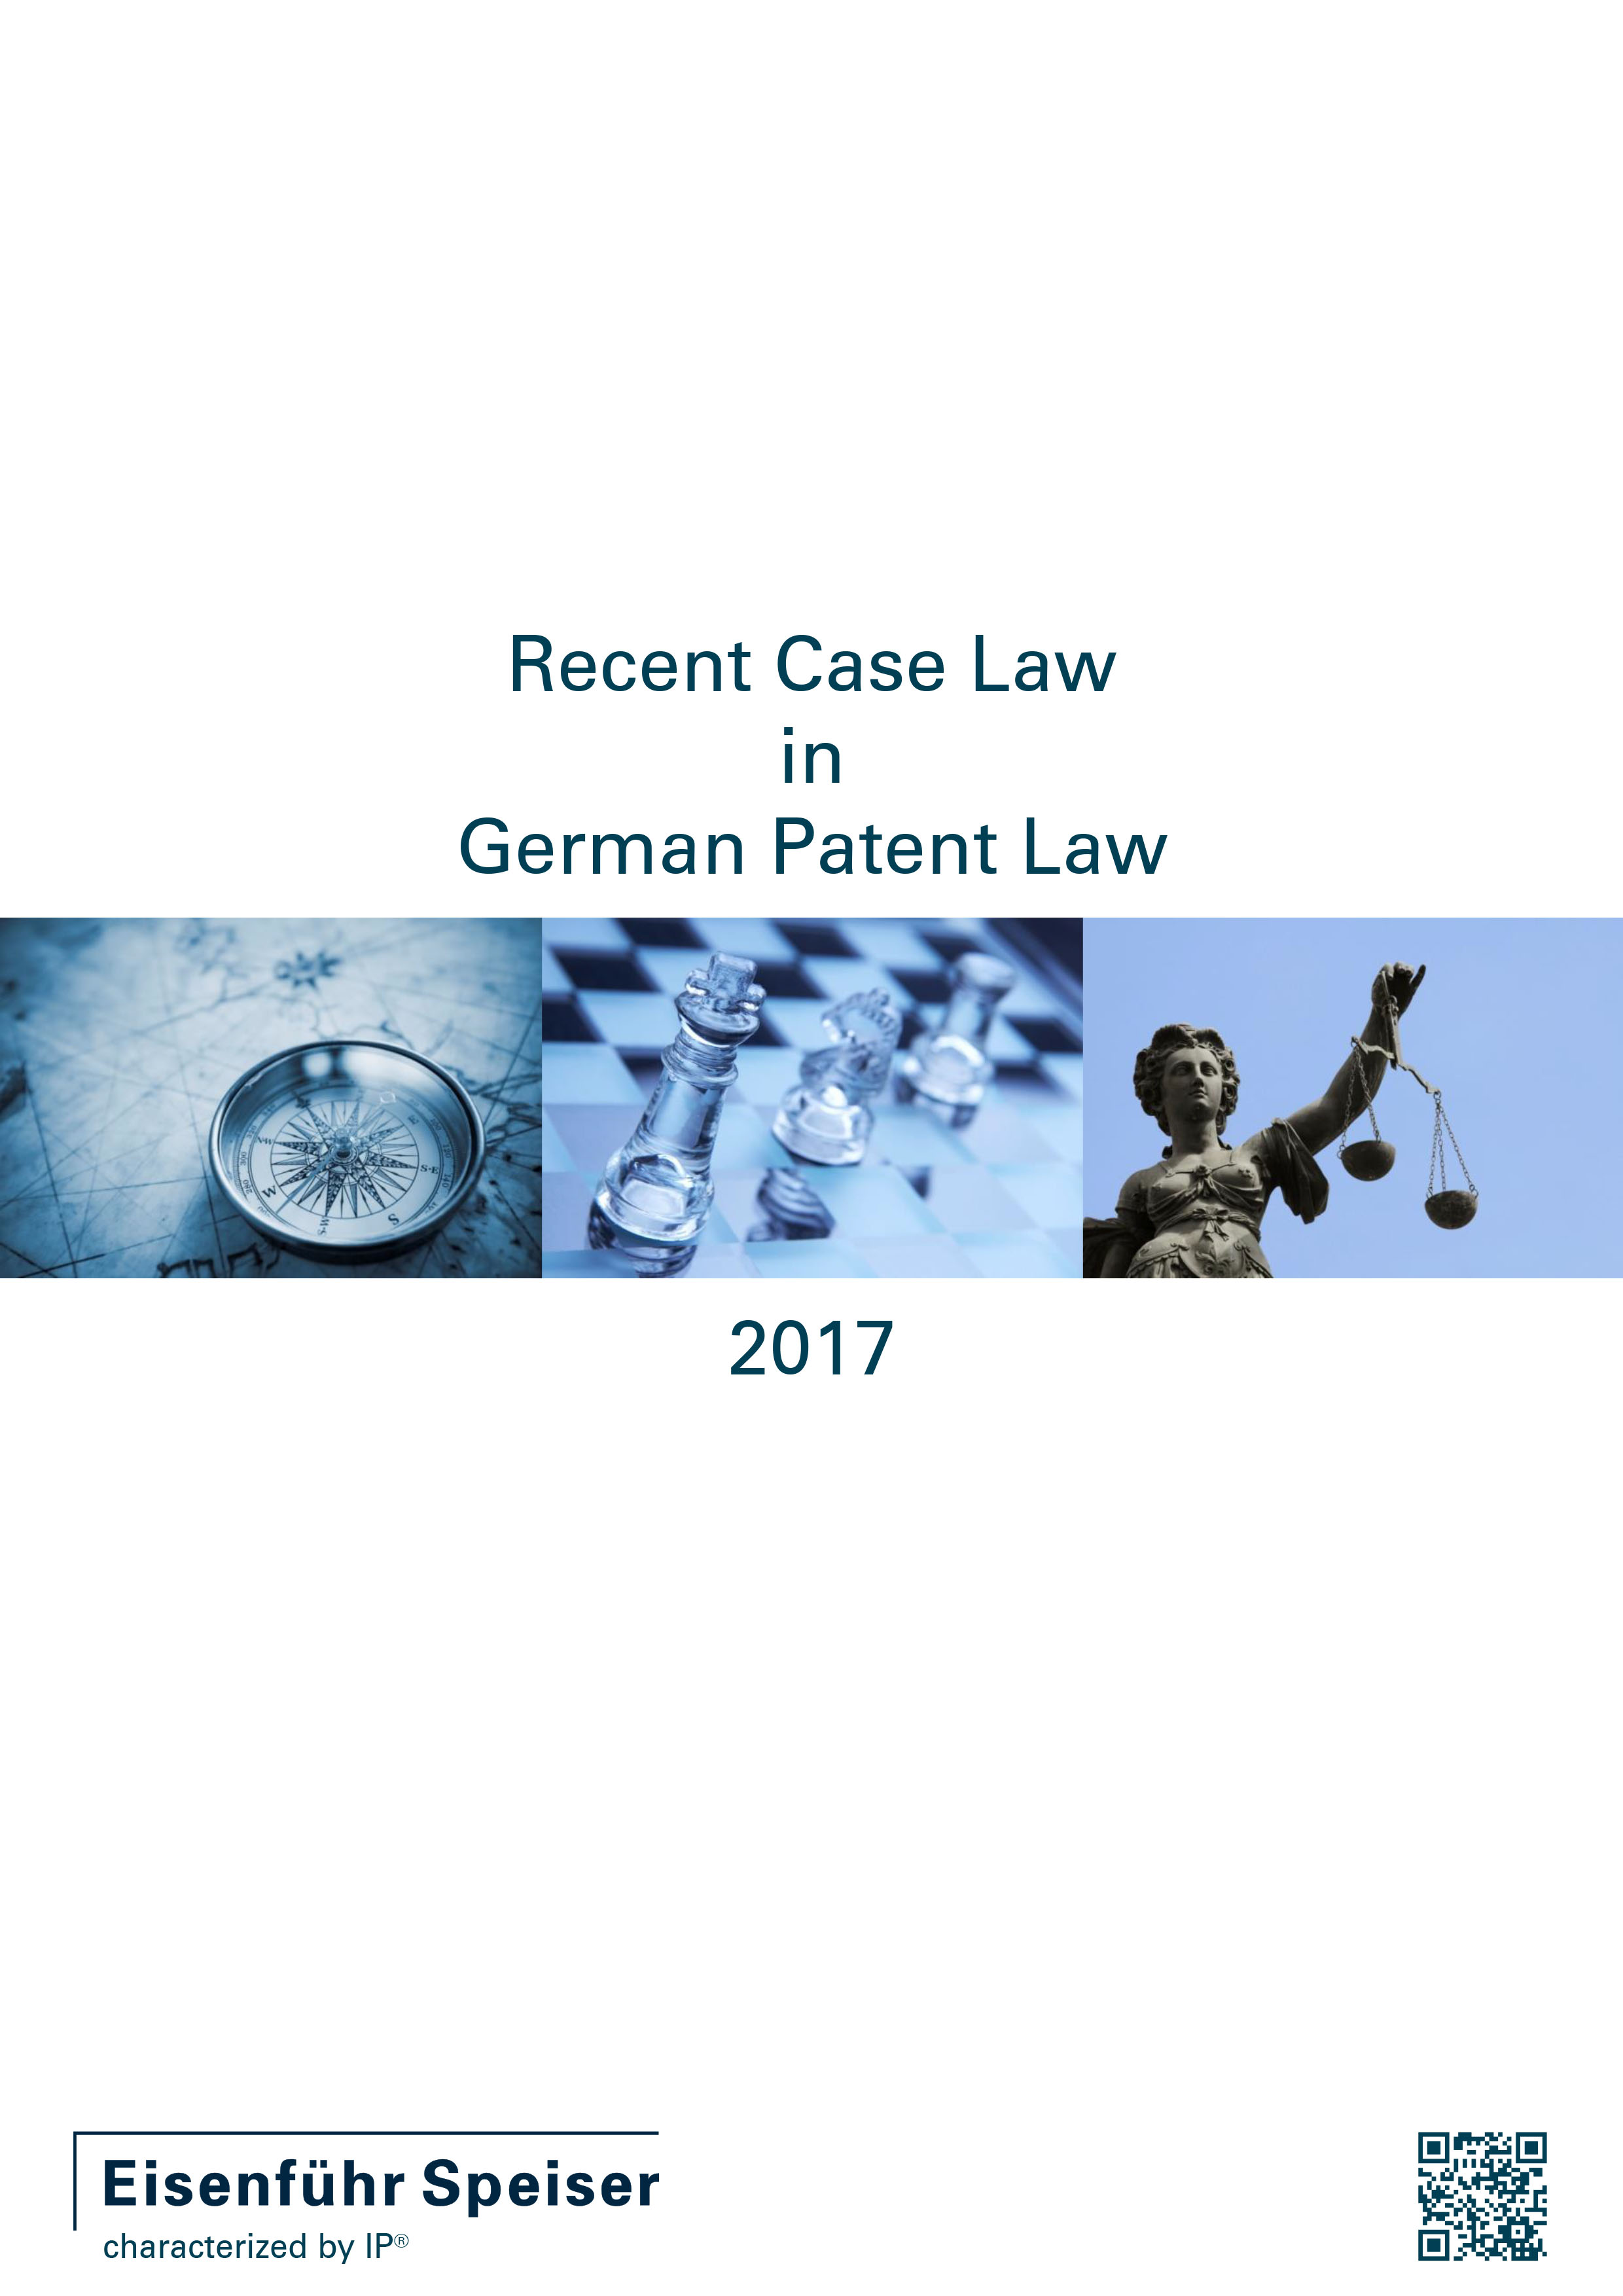 Recent Case Law in German Patent Law 2017